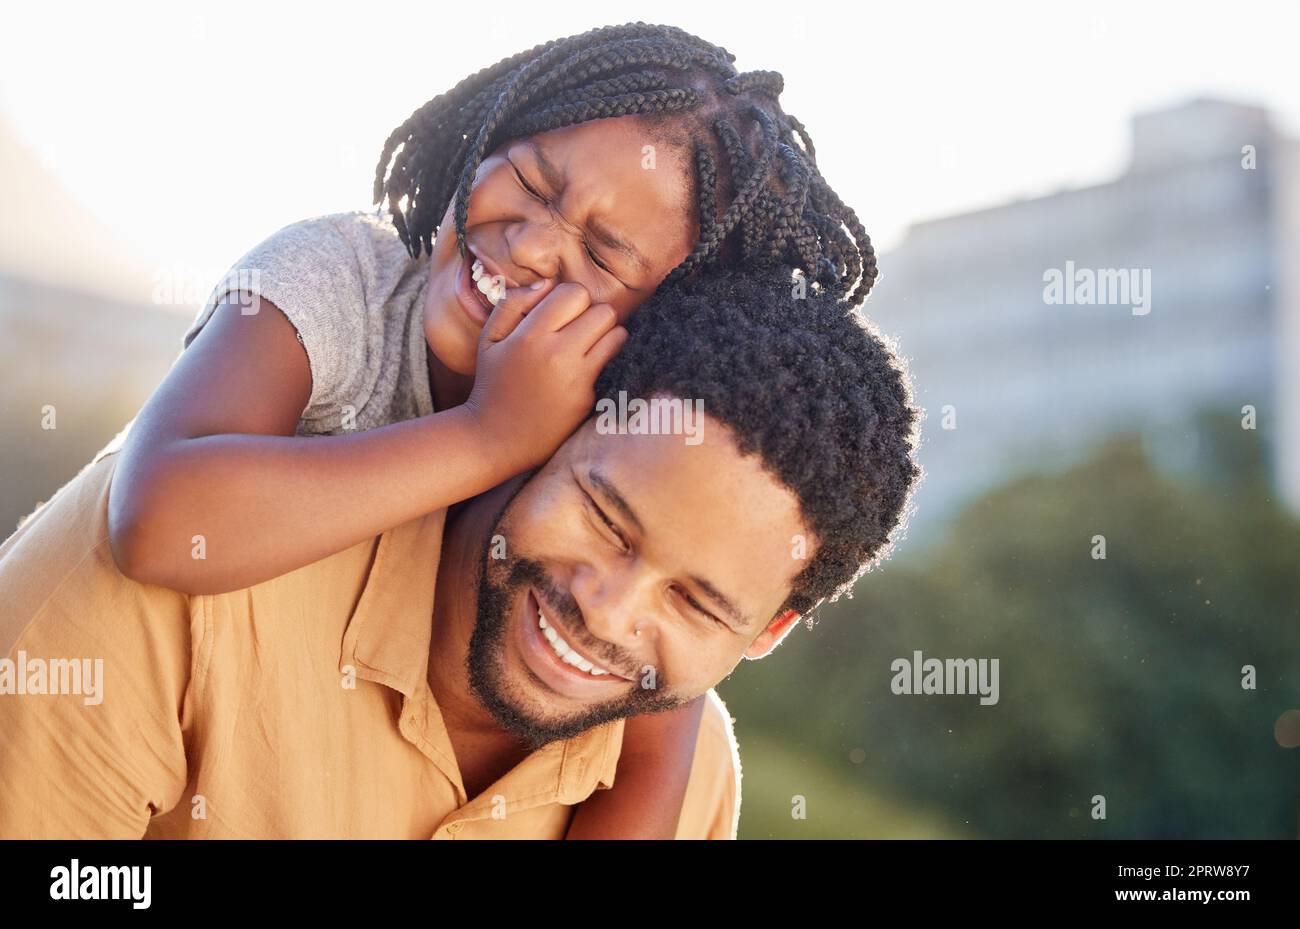 Happy, black father and daughter smiling on back in joyful happiness and bonding in the outdoor nature. African little girl smile, laughing and enjoying time with caring dad in the summer outside Stock Photo